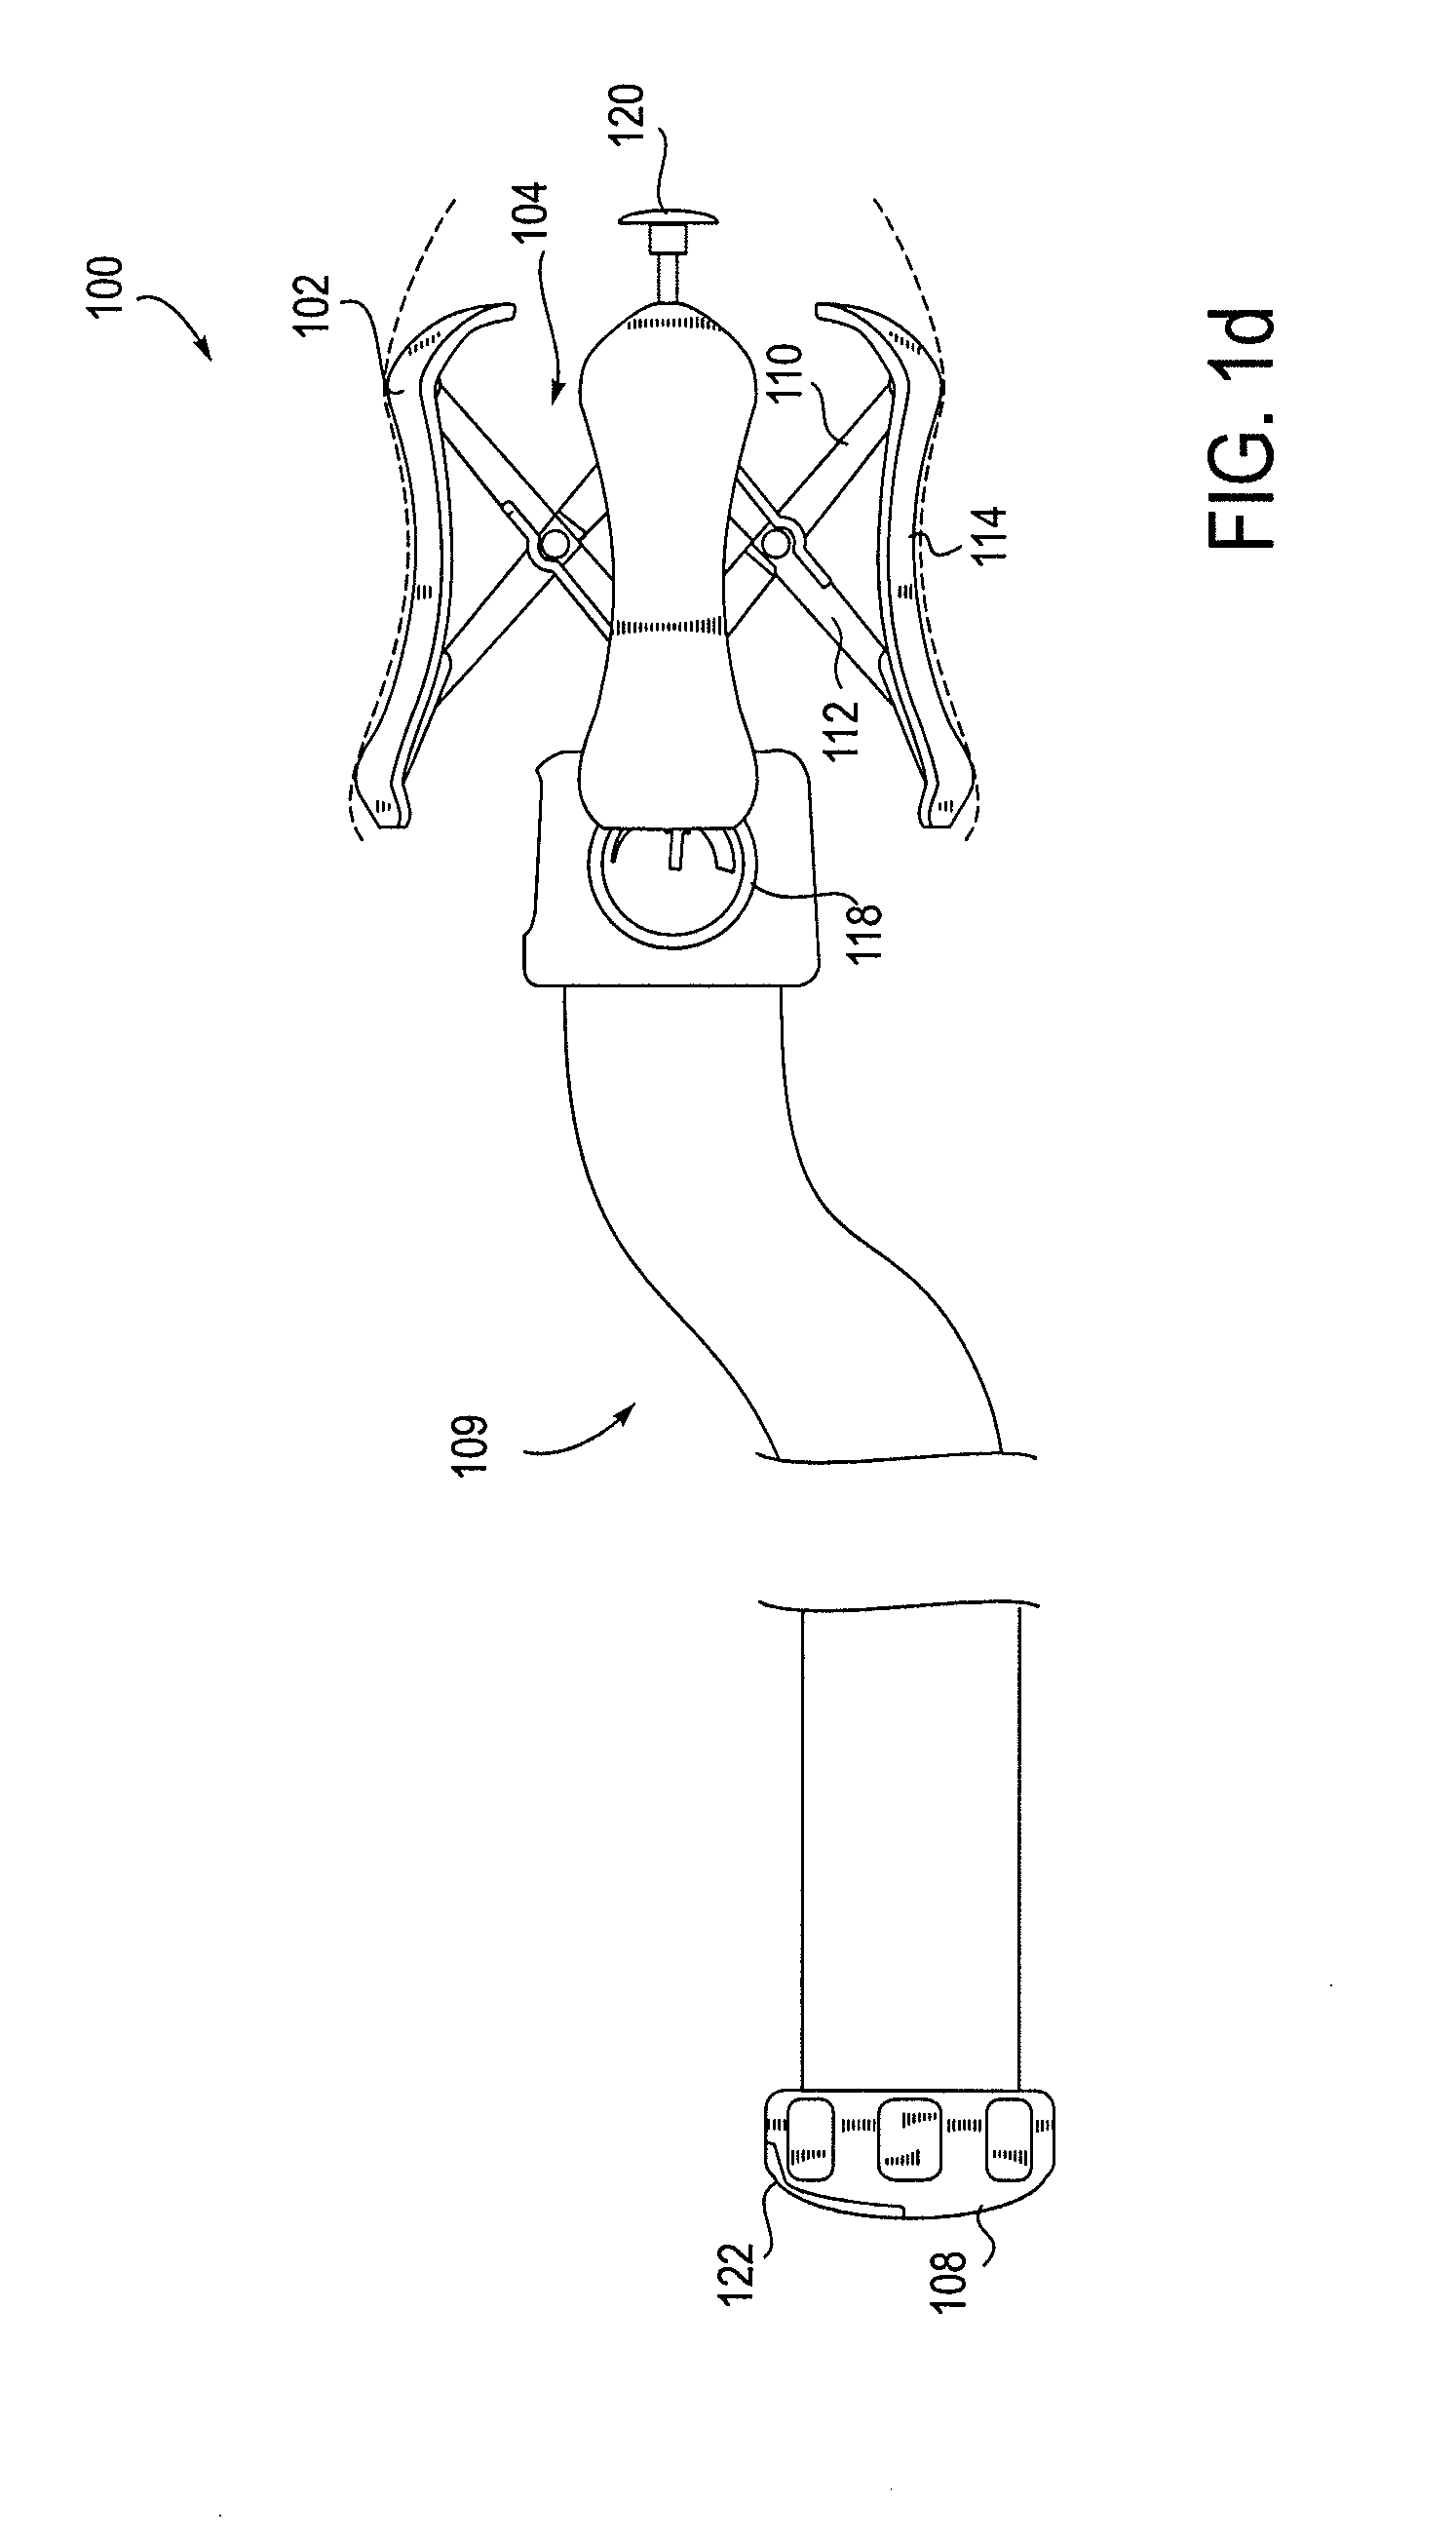 Method and apparatus for preventing vaginal lacerations during childbirth